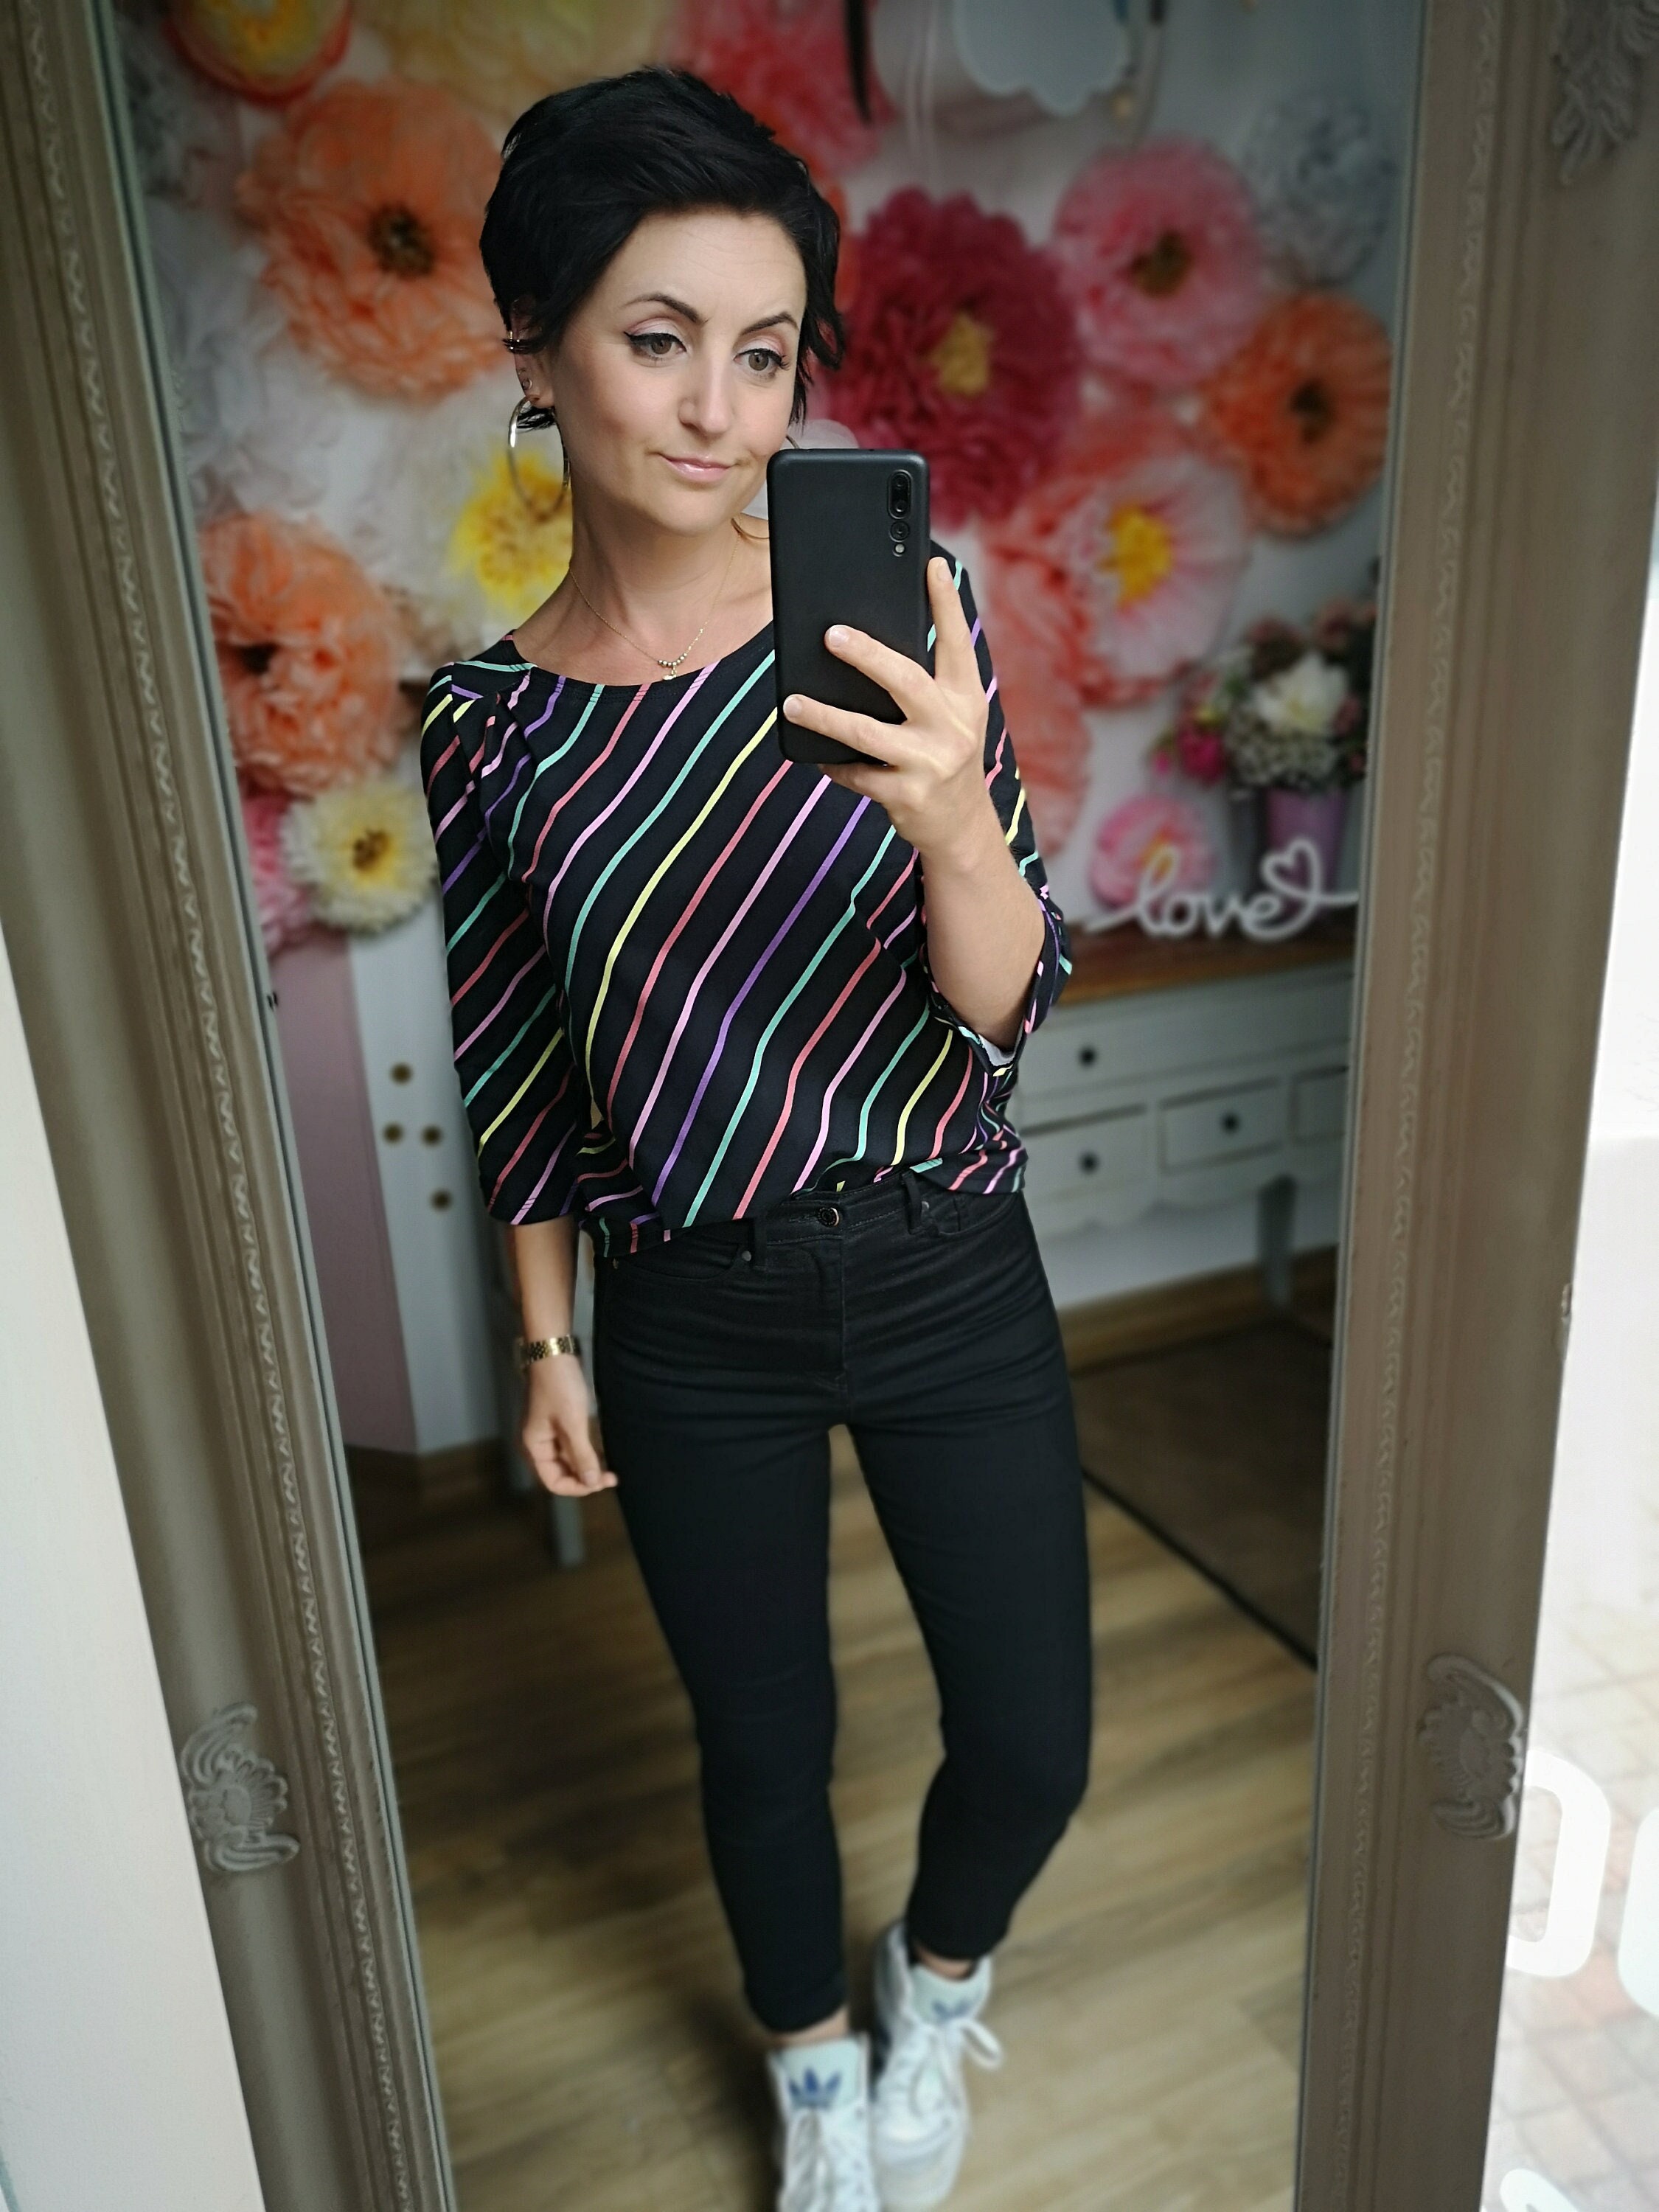 MEKO® blusy Blouses for Women, Top With Colorful Stripes, Black, Blouse for  the Office, Shirt From Meko Store - Etsy Hong Kong